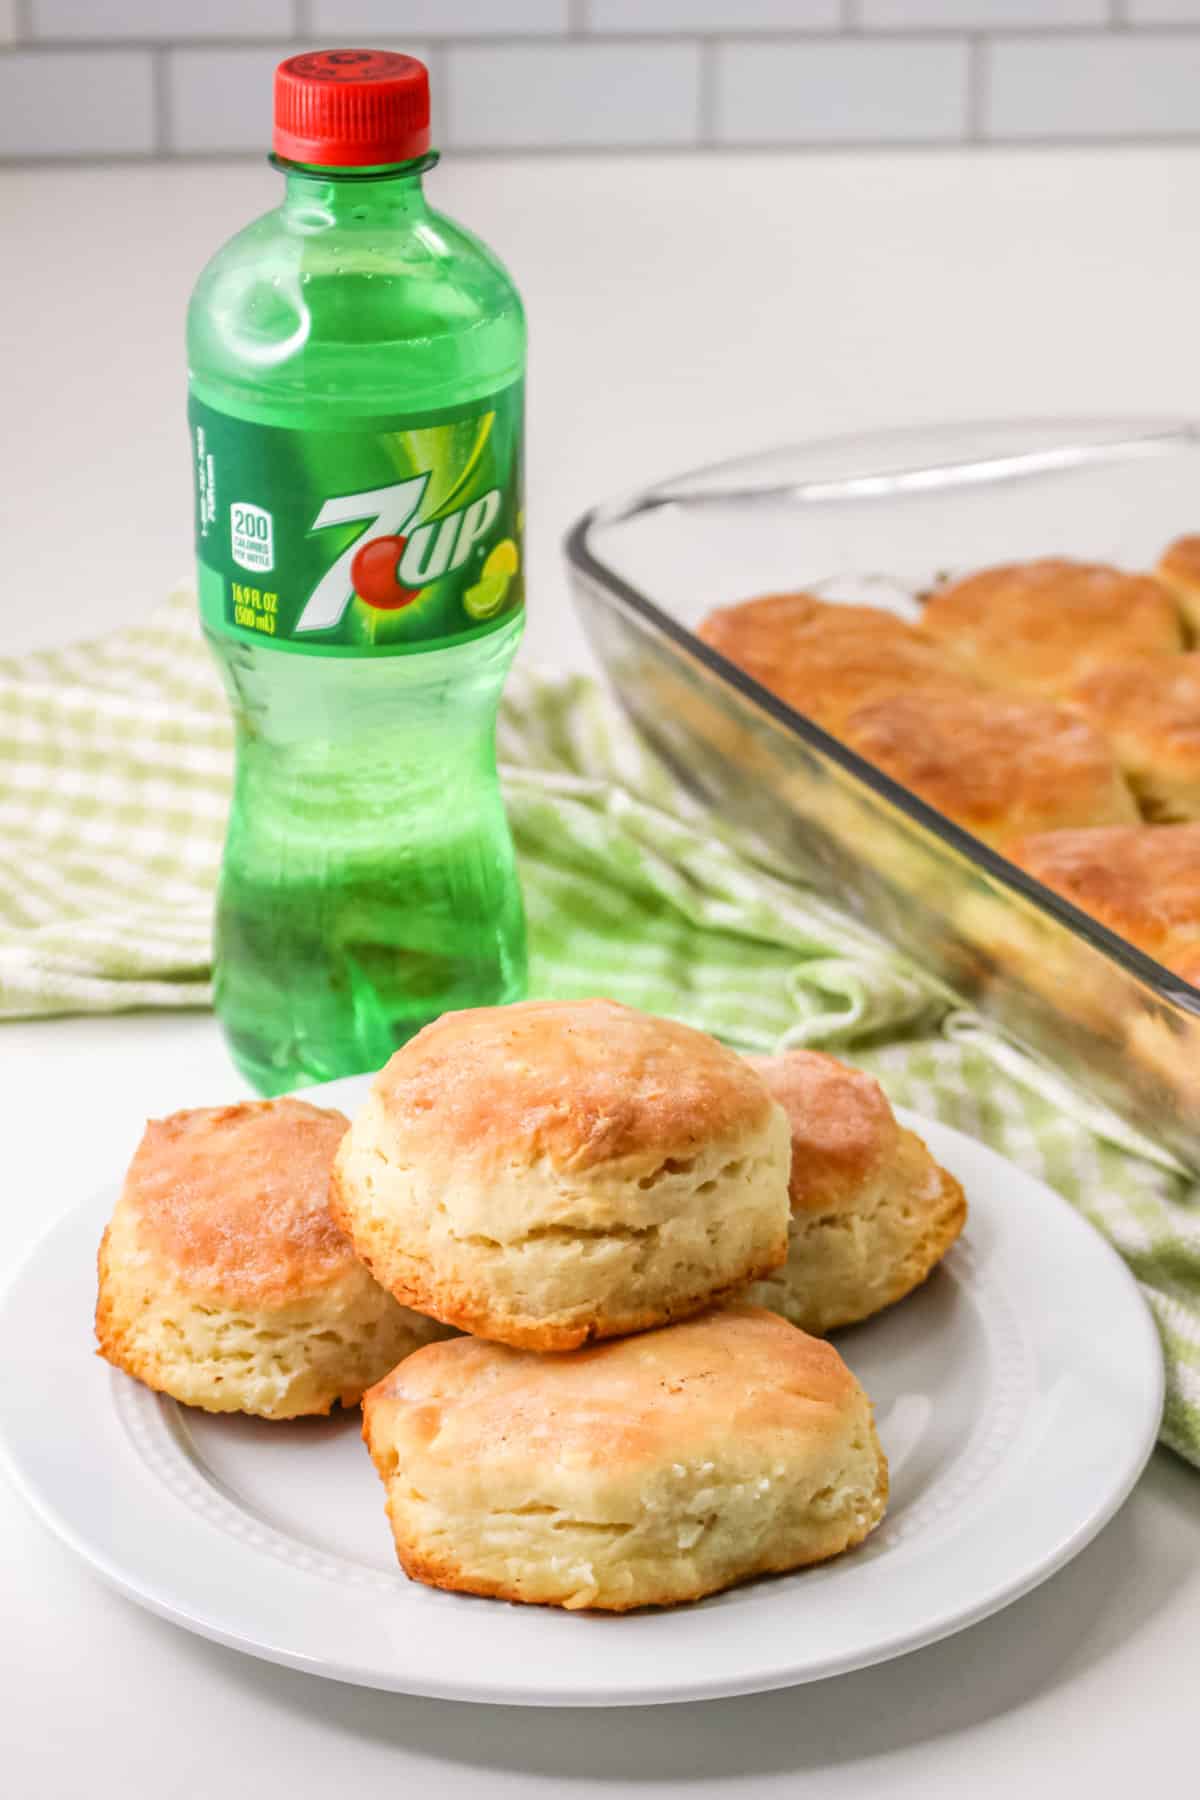 4 Bisquick 7 up biscuits on a plate next to the rest in a baking dish and a bottle of 7 up soda. 